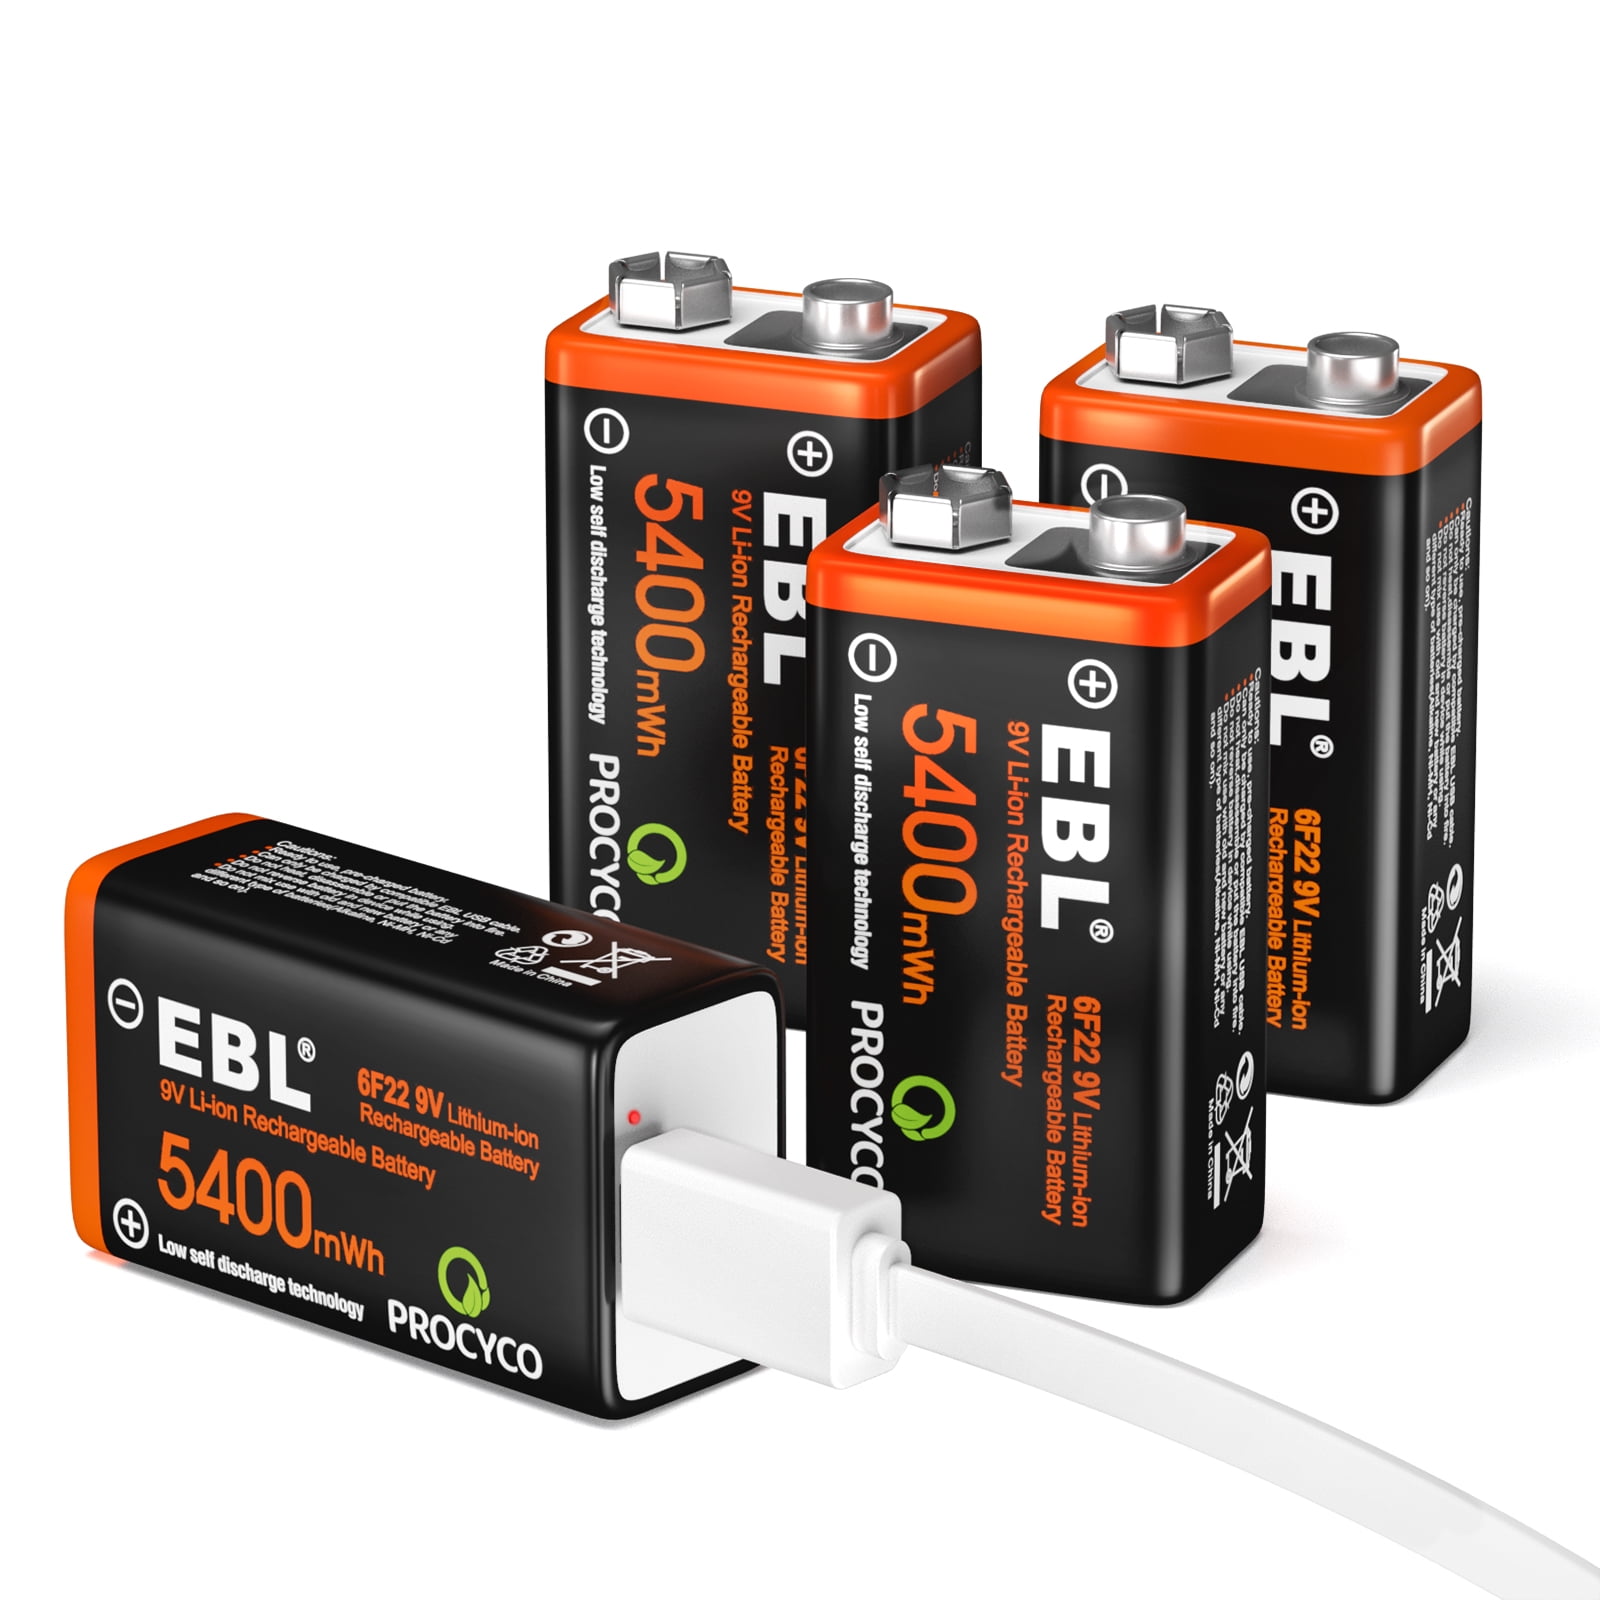 EBL 4Pcs USB Rechargeable 9V Lithium Batteries - 5400mWh Long Lasting  LI-ion Batteries with Micro Charging Cable - Quick Charge in 2 Hours 